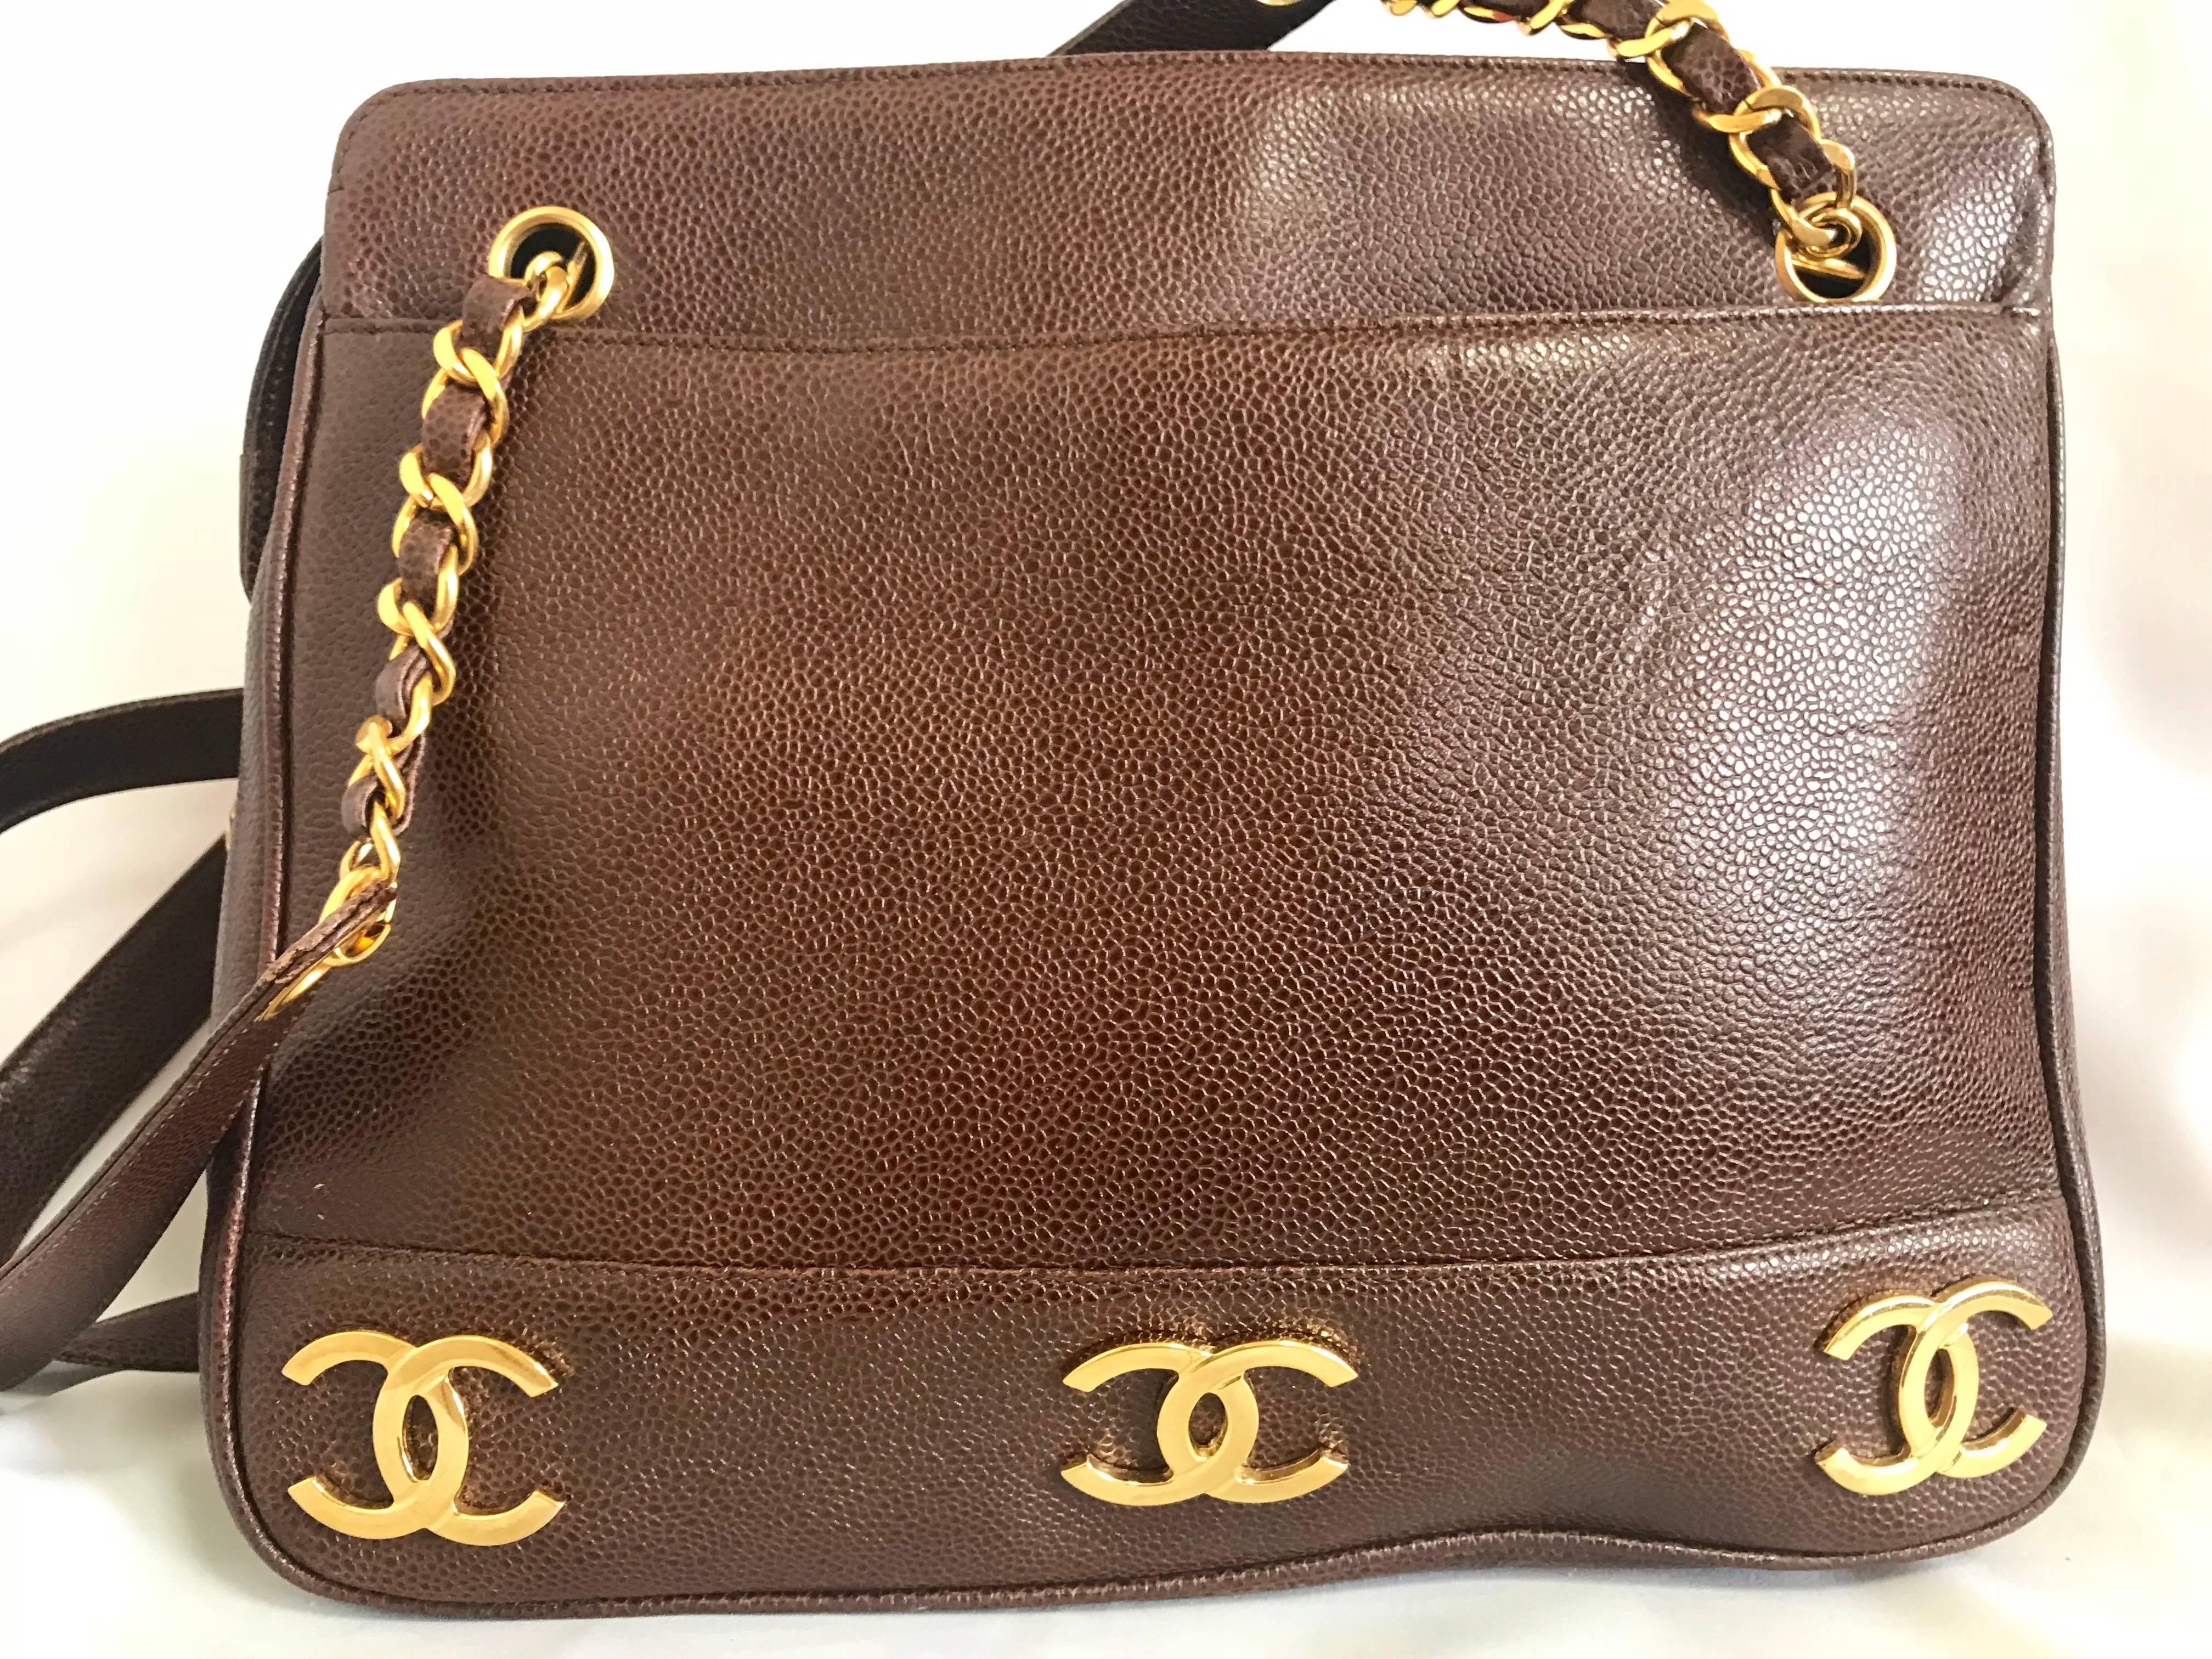 Vintage CHANEL brown caviar leather chain shoulder bag with 3 golden CC marks. For Sale 2